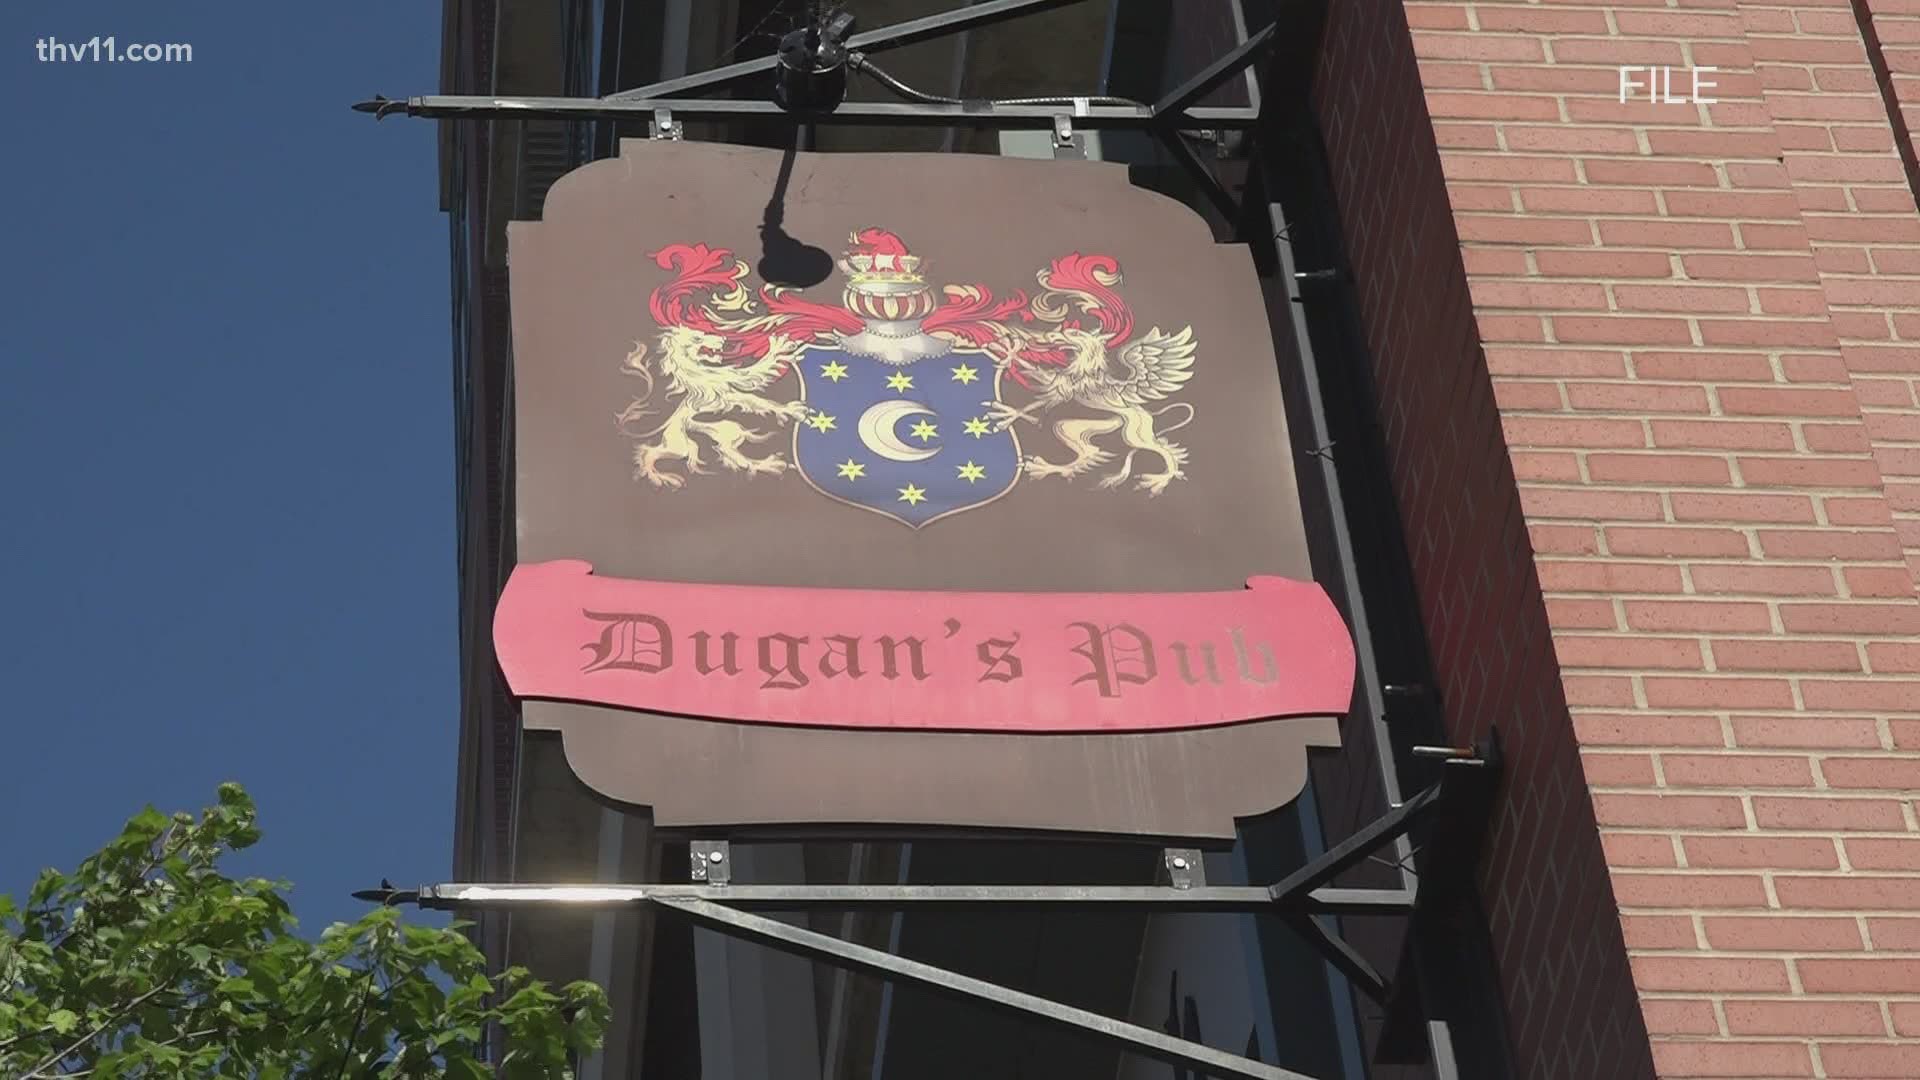 On Razorback game days, as many as 100 people would crowd into Dugan's Pub in downtown Little Rock.